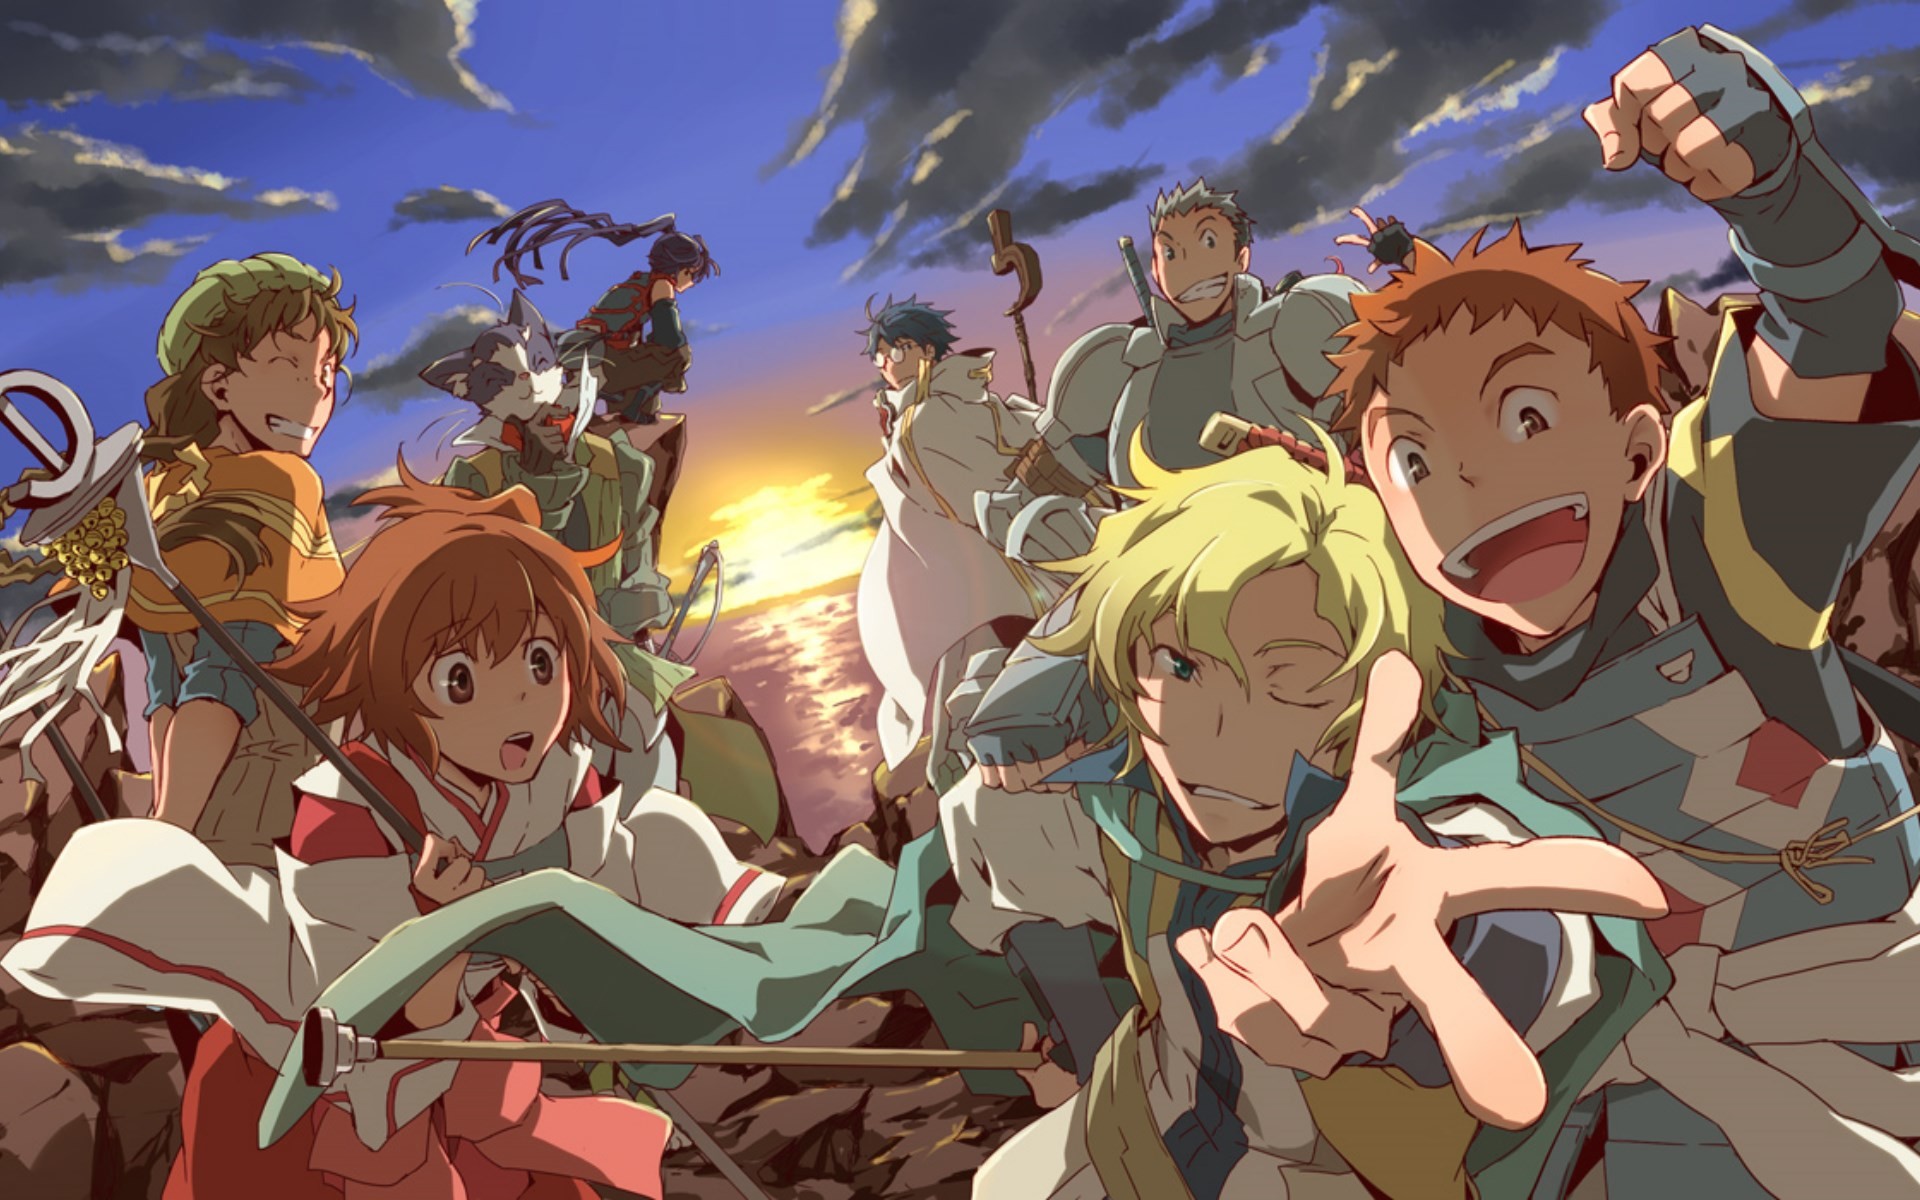 Watch Log Horizon 2 episodes online in high quality with professional English subtitles on AnimeShow